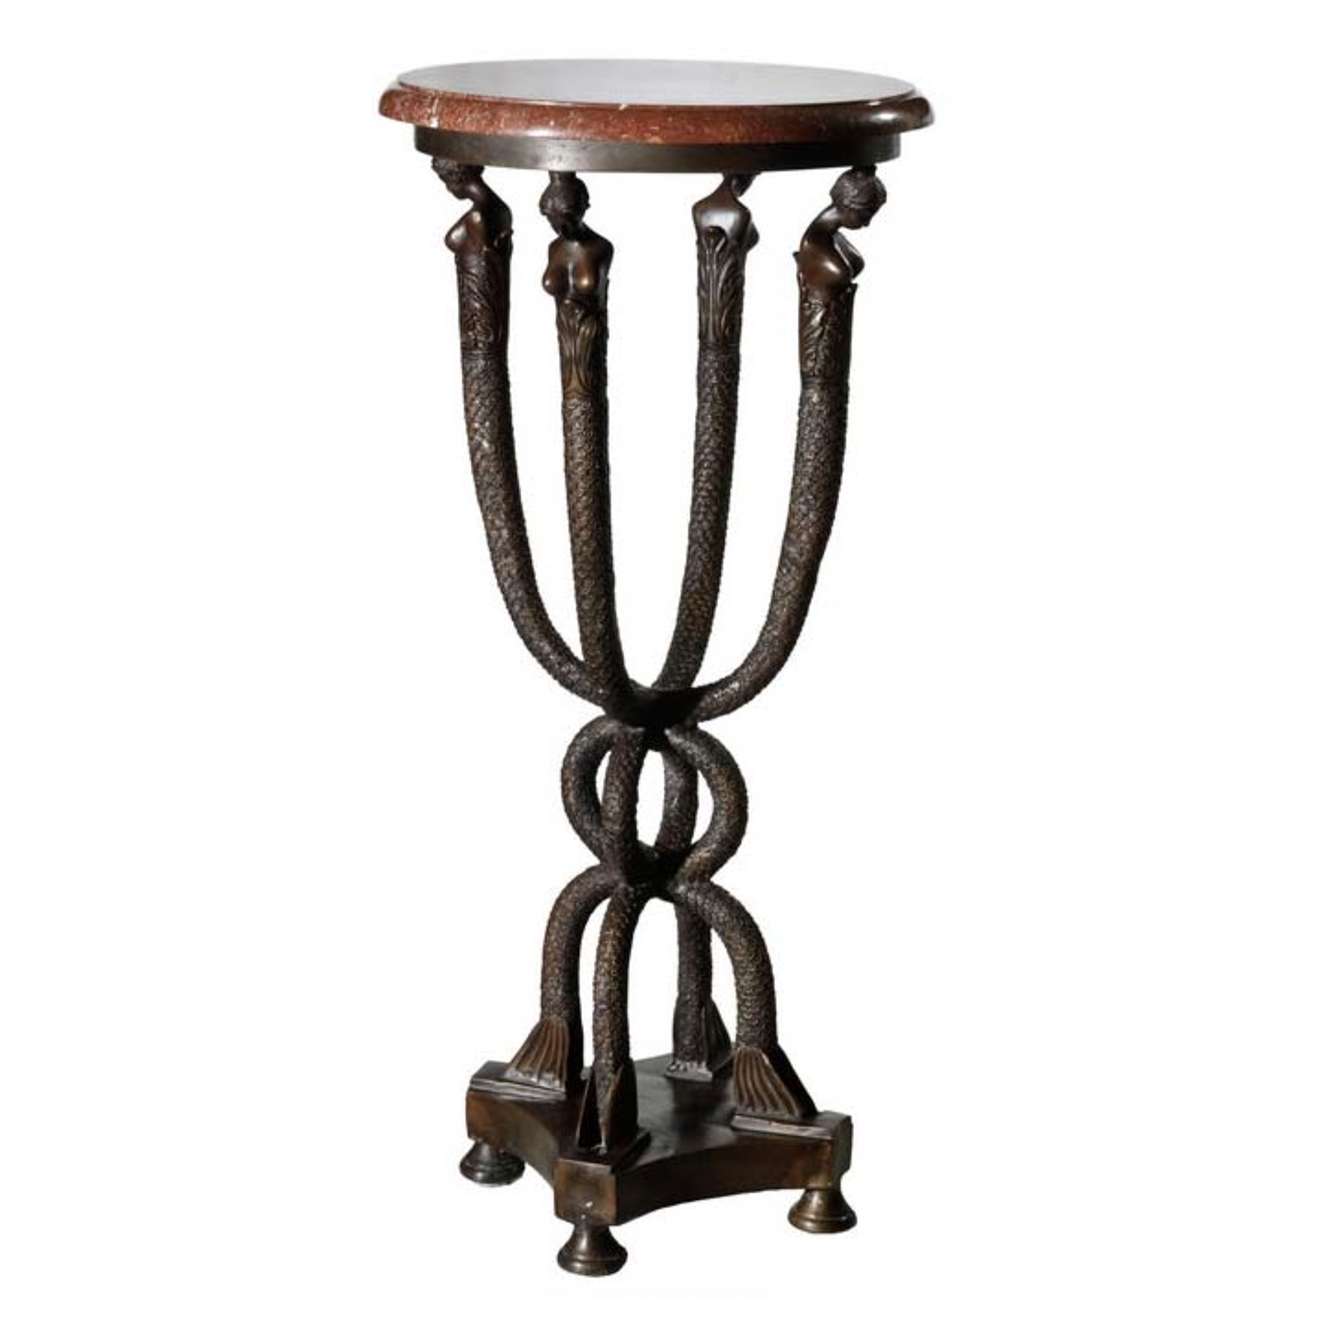 bronze accent table marble surface metropolitan galleries inc antique pipe coffee small oak side white and wood waterproof tablecloth sage green lucite dining chairs mint bedside